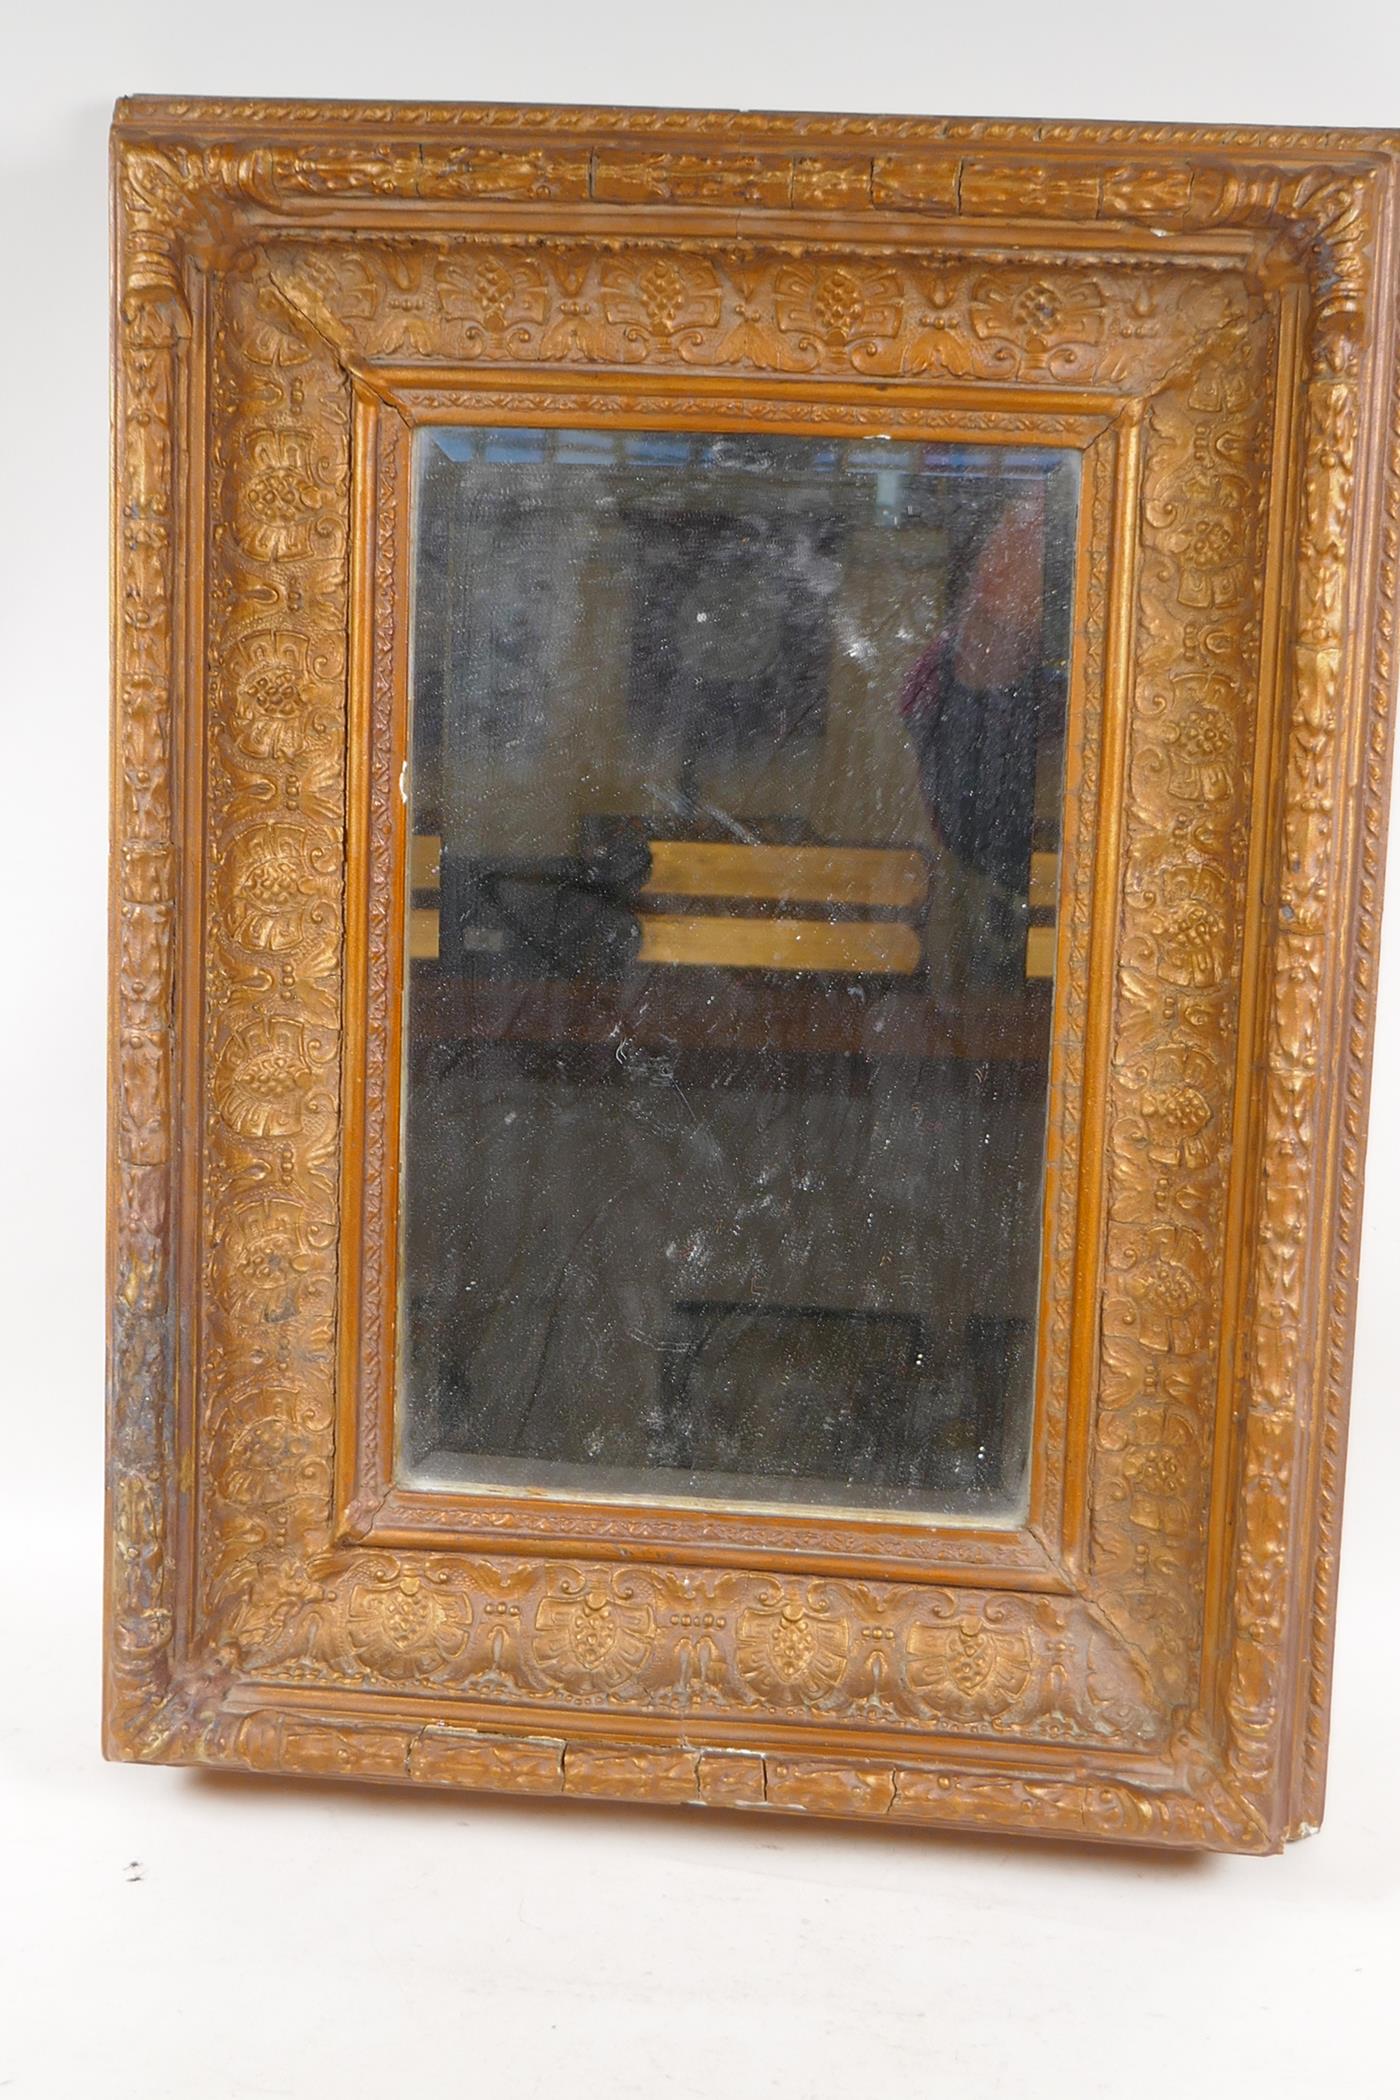 A gilt framed bevelled glass mirror, plate 14" x 9" - Image 2 of 2